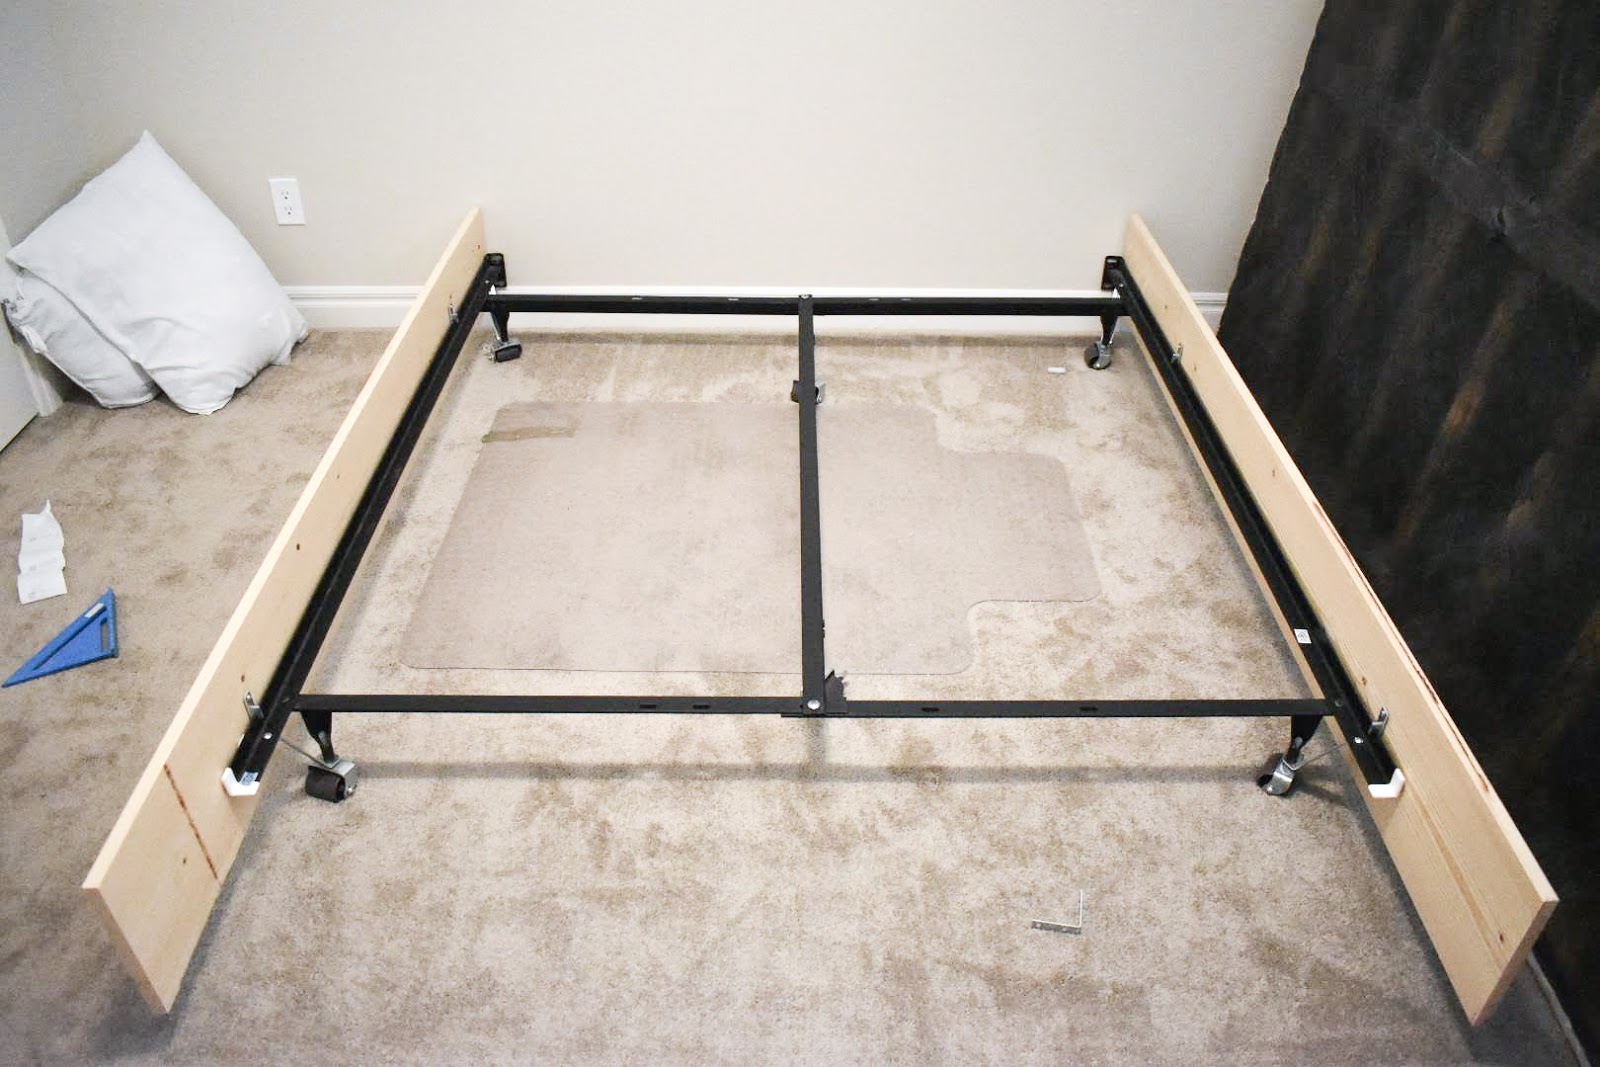 How To Cut A Metal Bed Frame